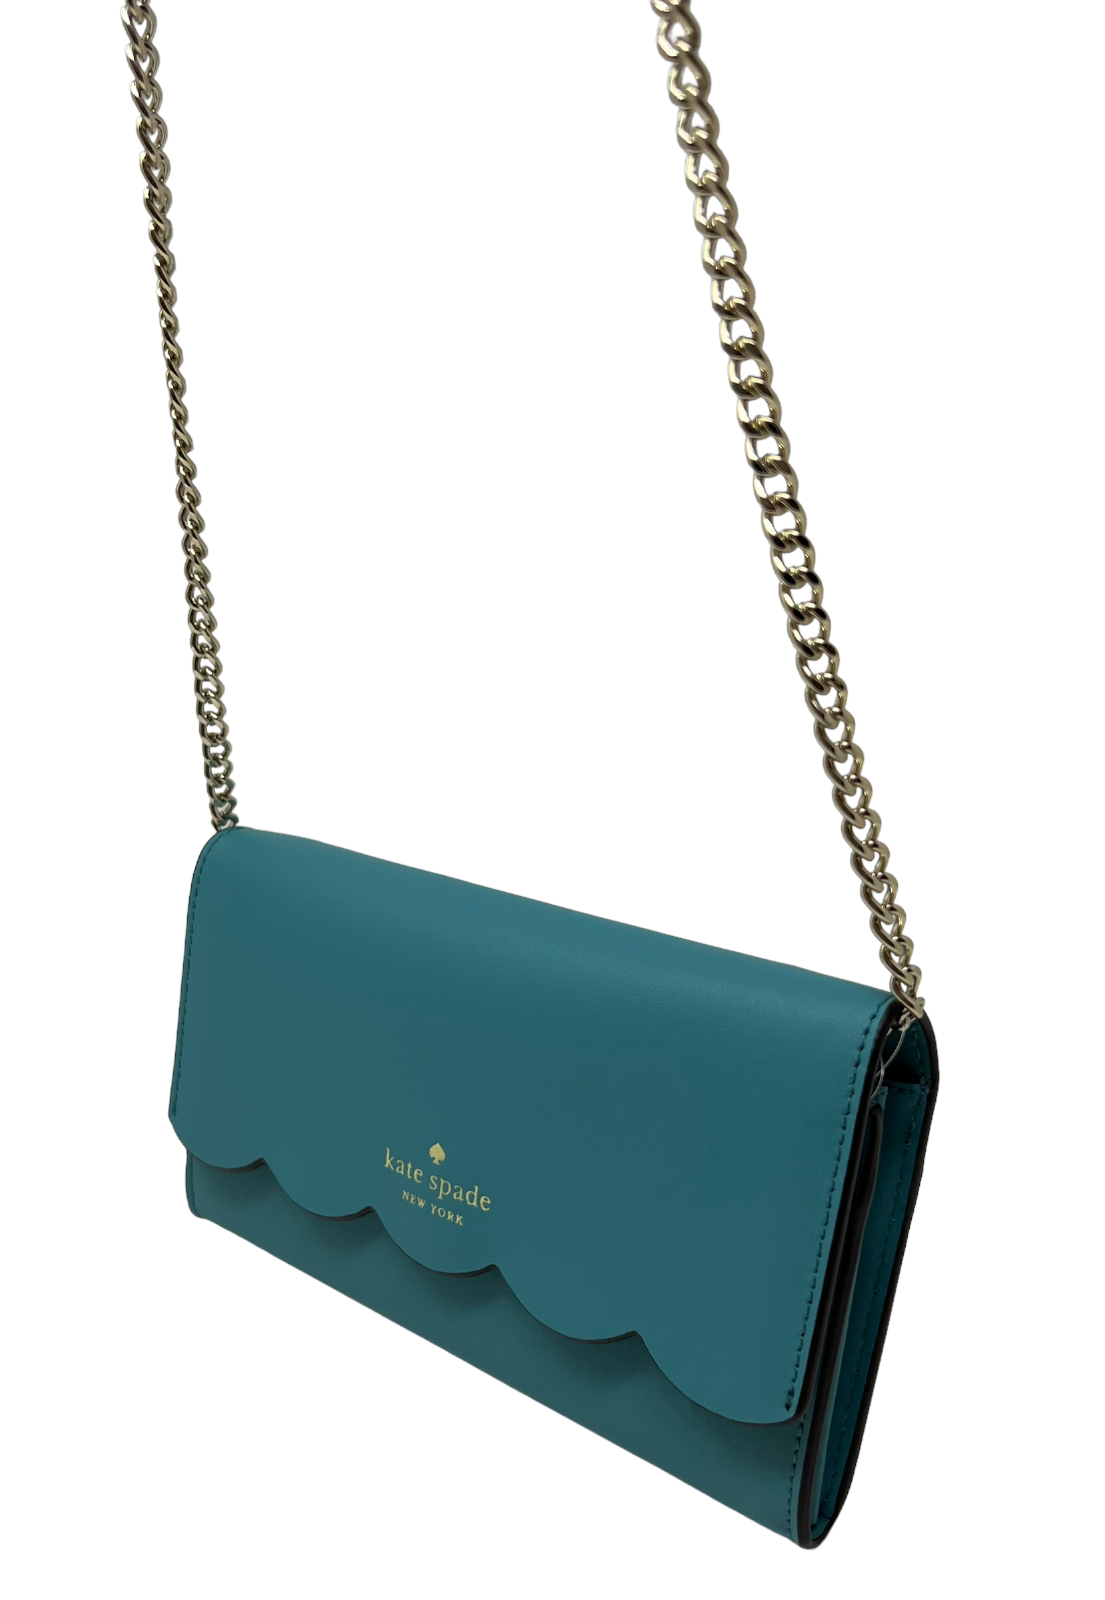 Kate Spade Gemma Stone Blue Smooth Leather Wallet on a Chain Bag WLR00552 $249